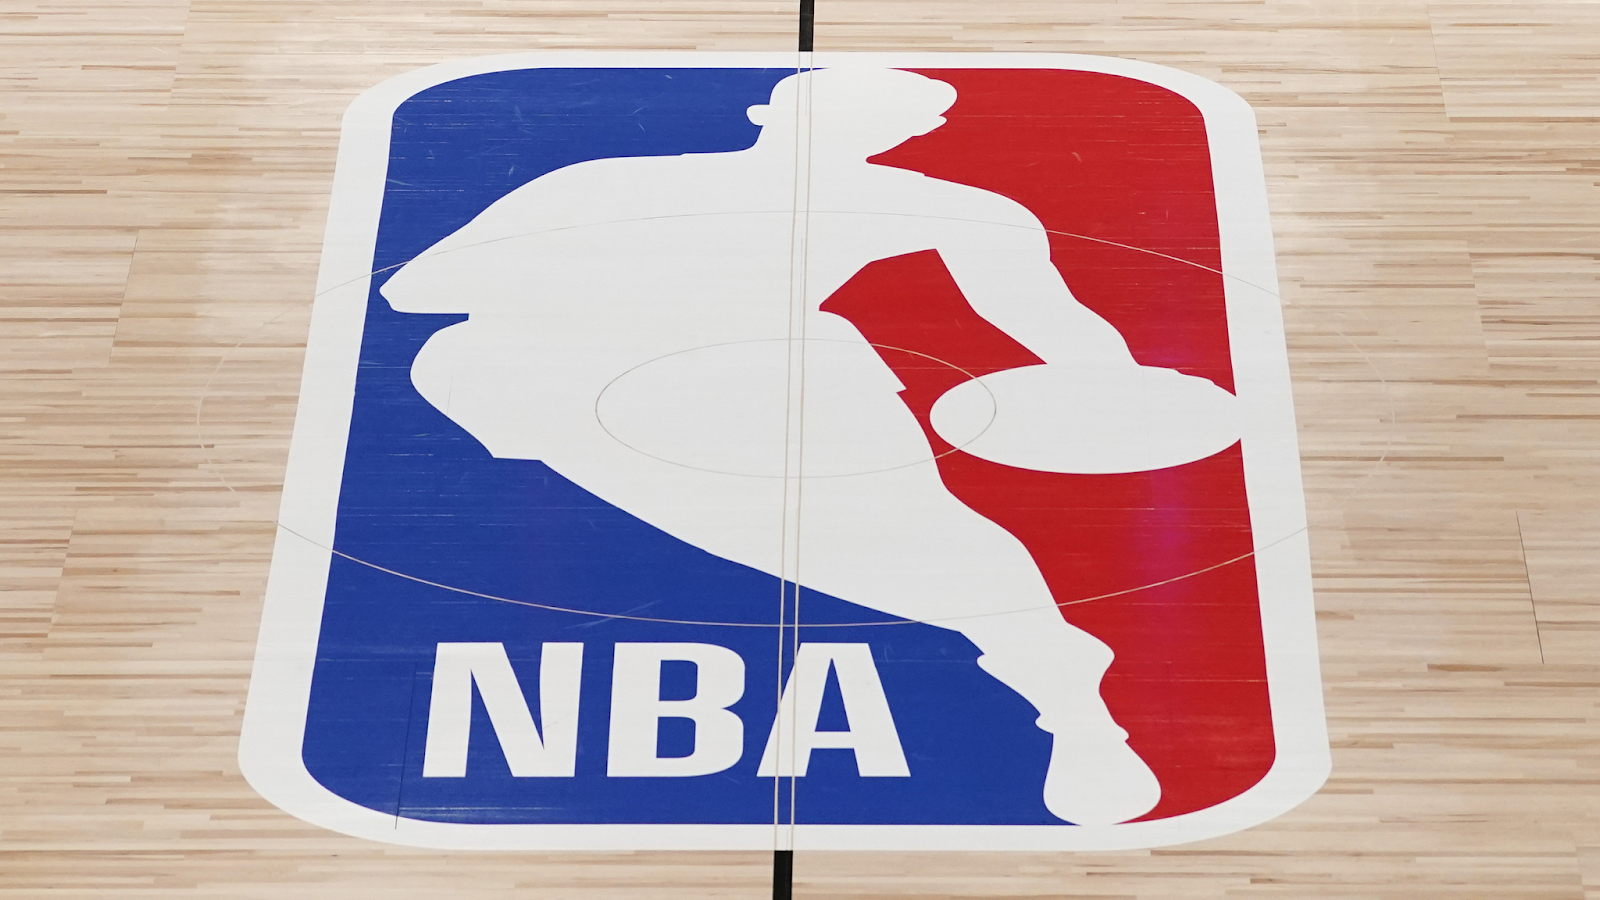 The NBA will not hold any games on election day to encourage people to vote. The NBA announced on the 16th of August 2022